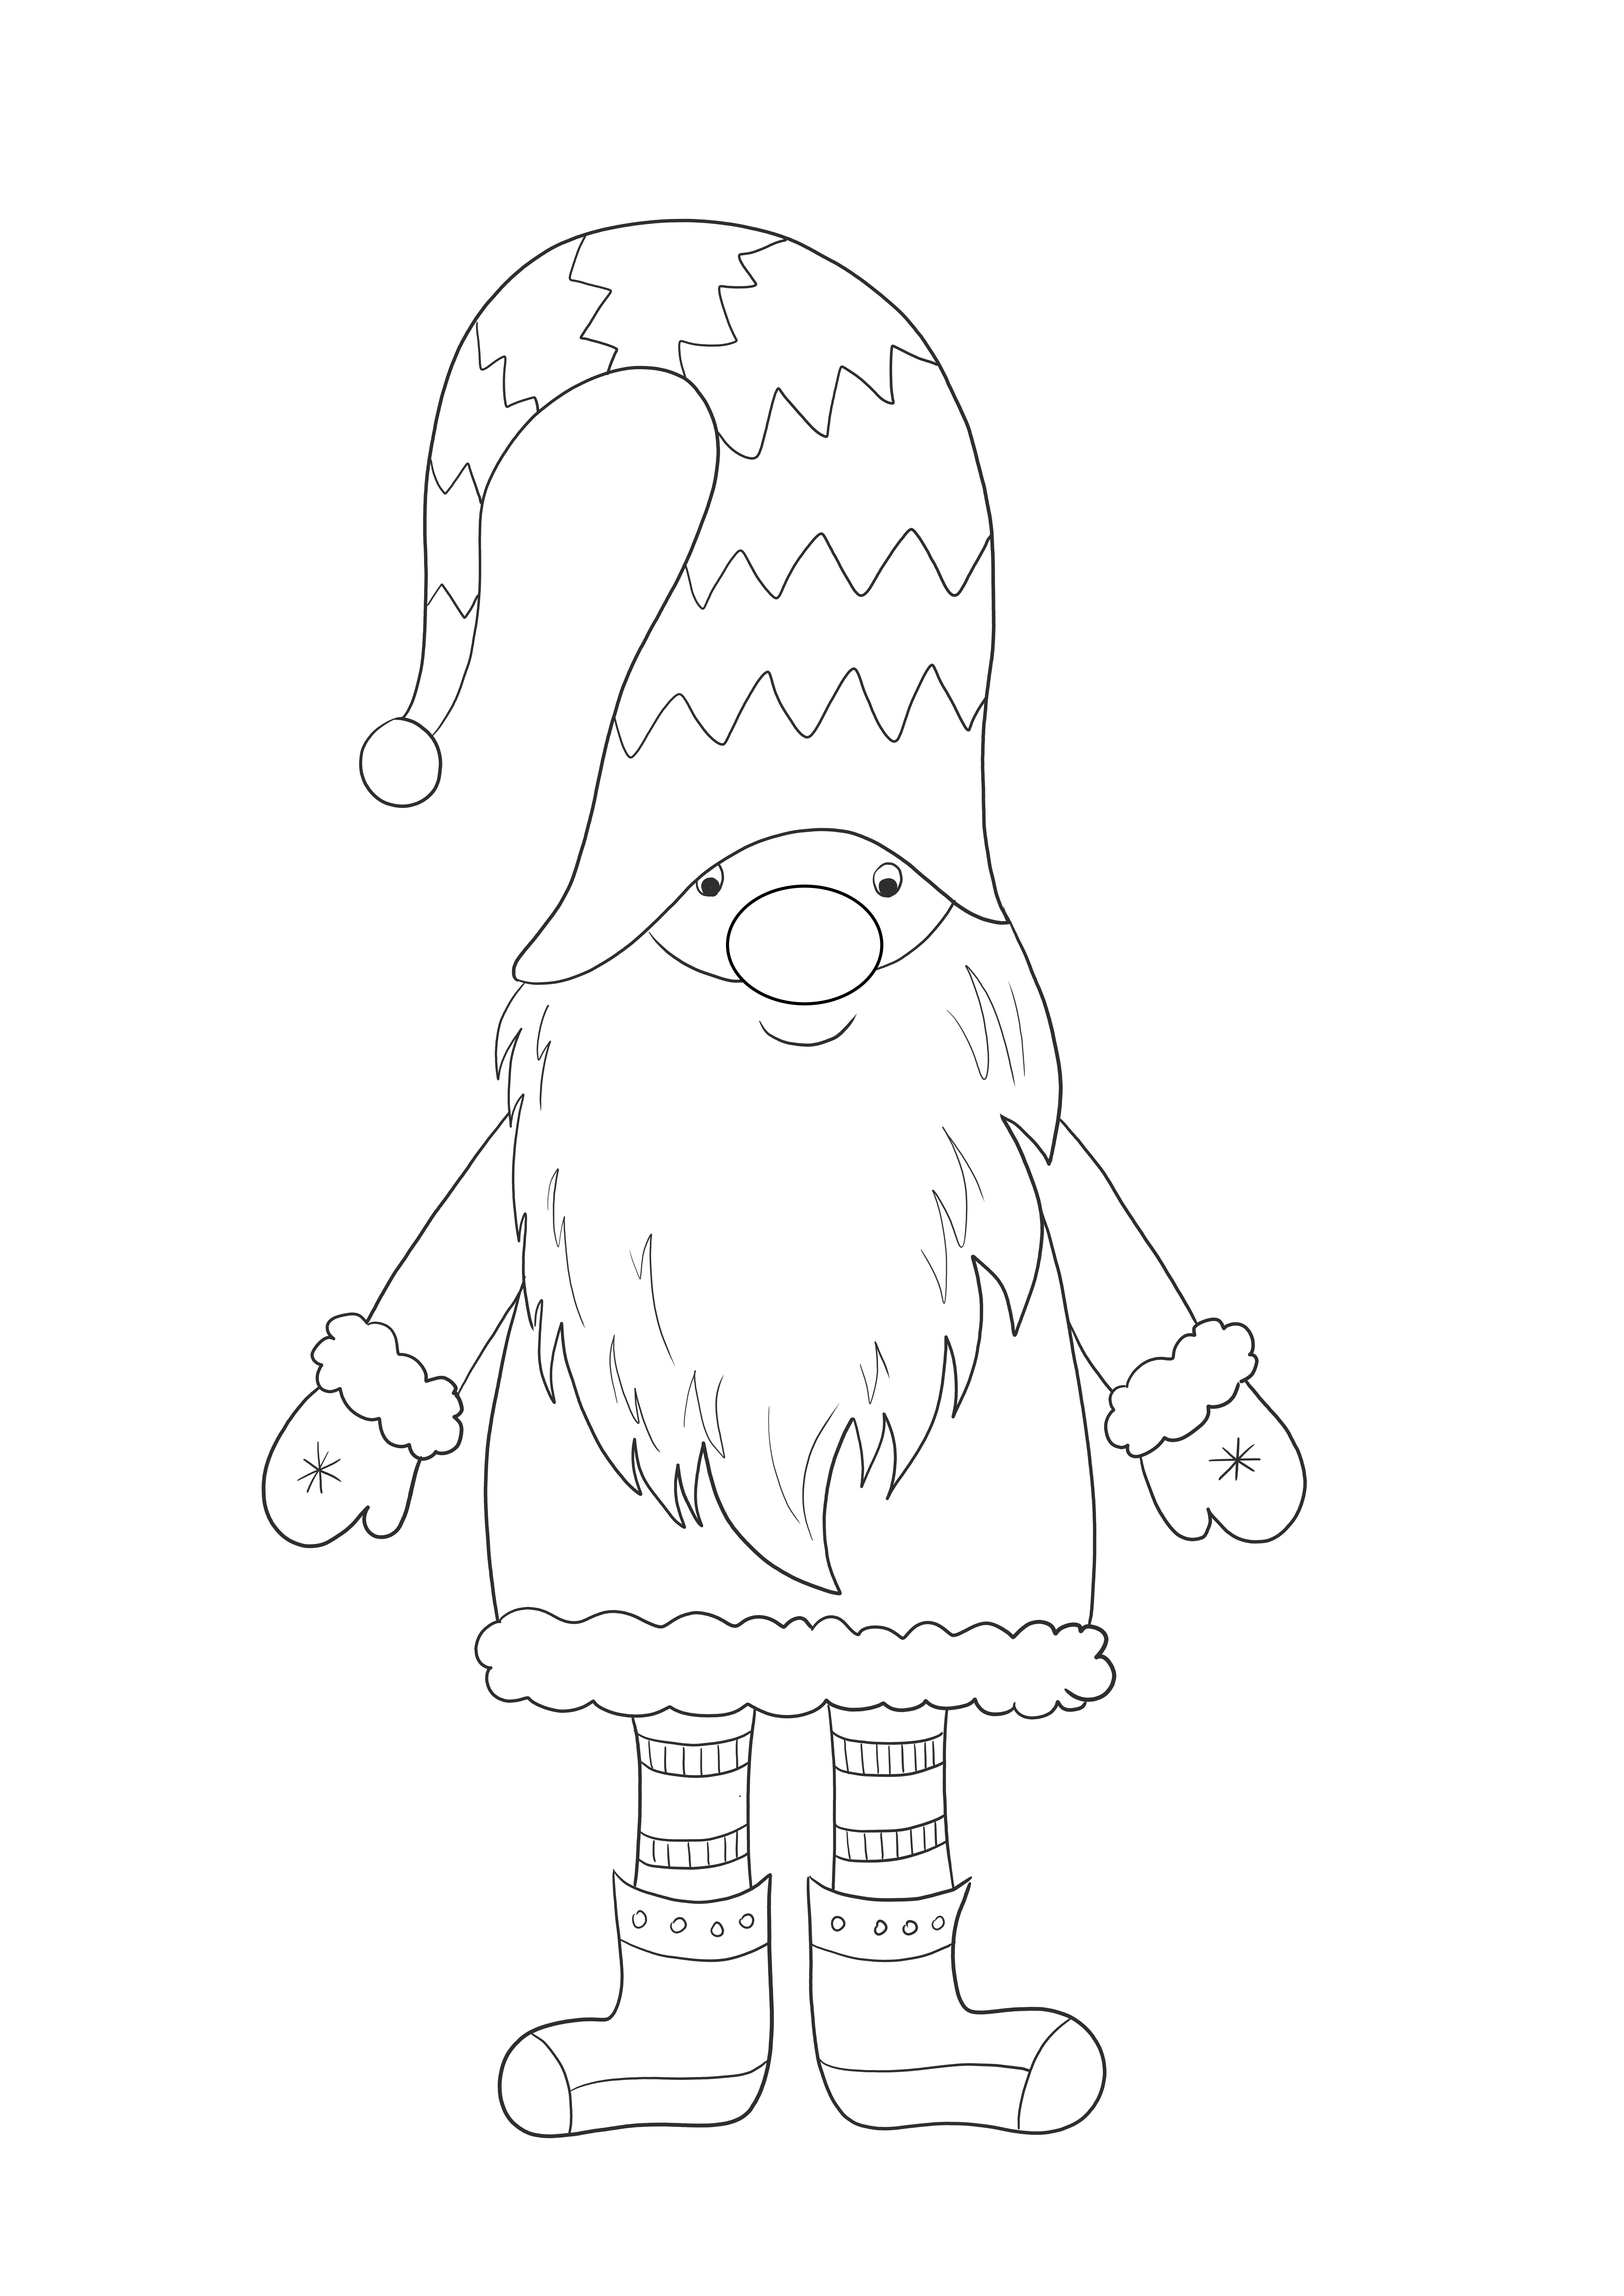 Funny coloring image of a Christmas Elf free to save or print